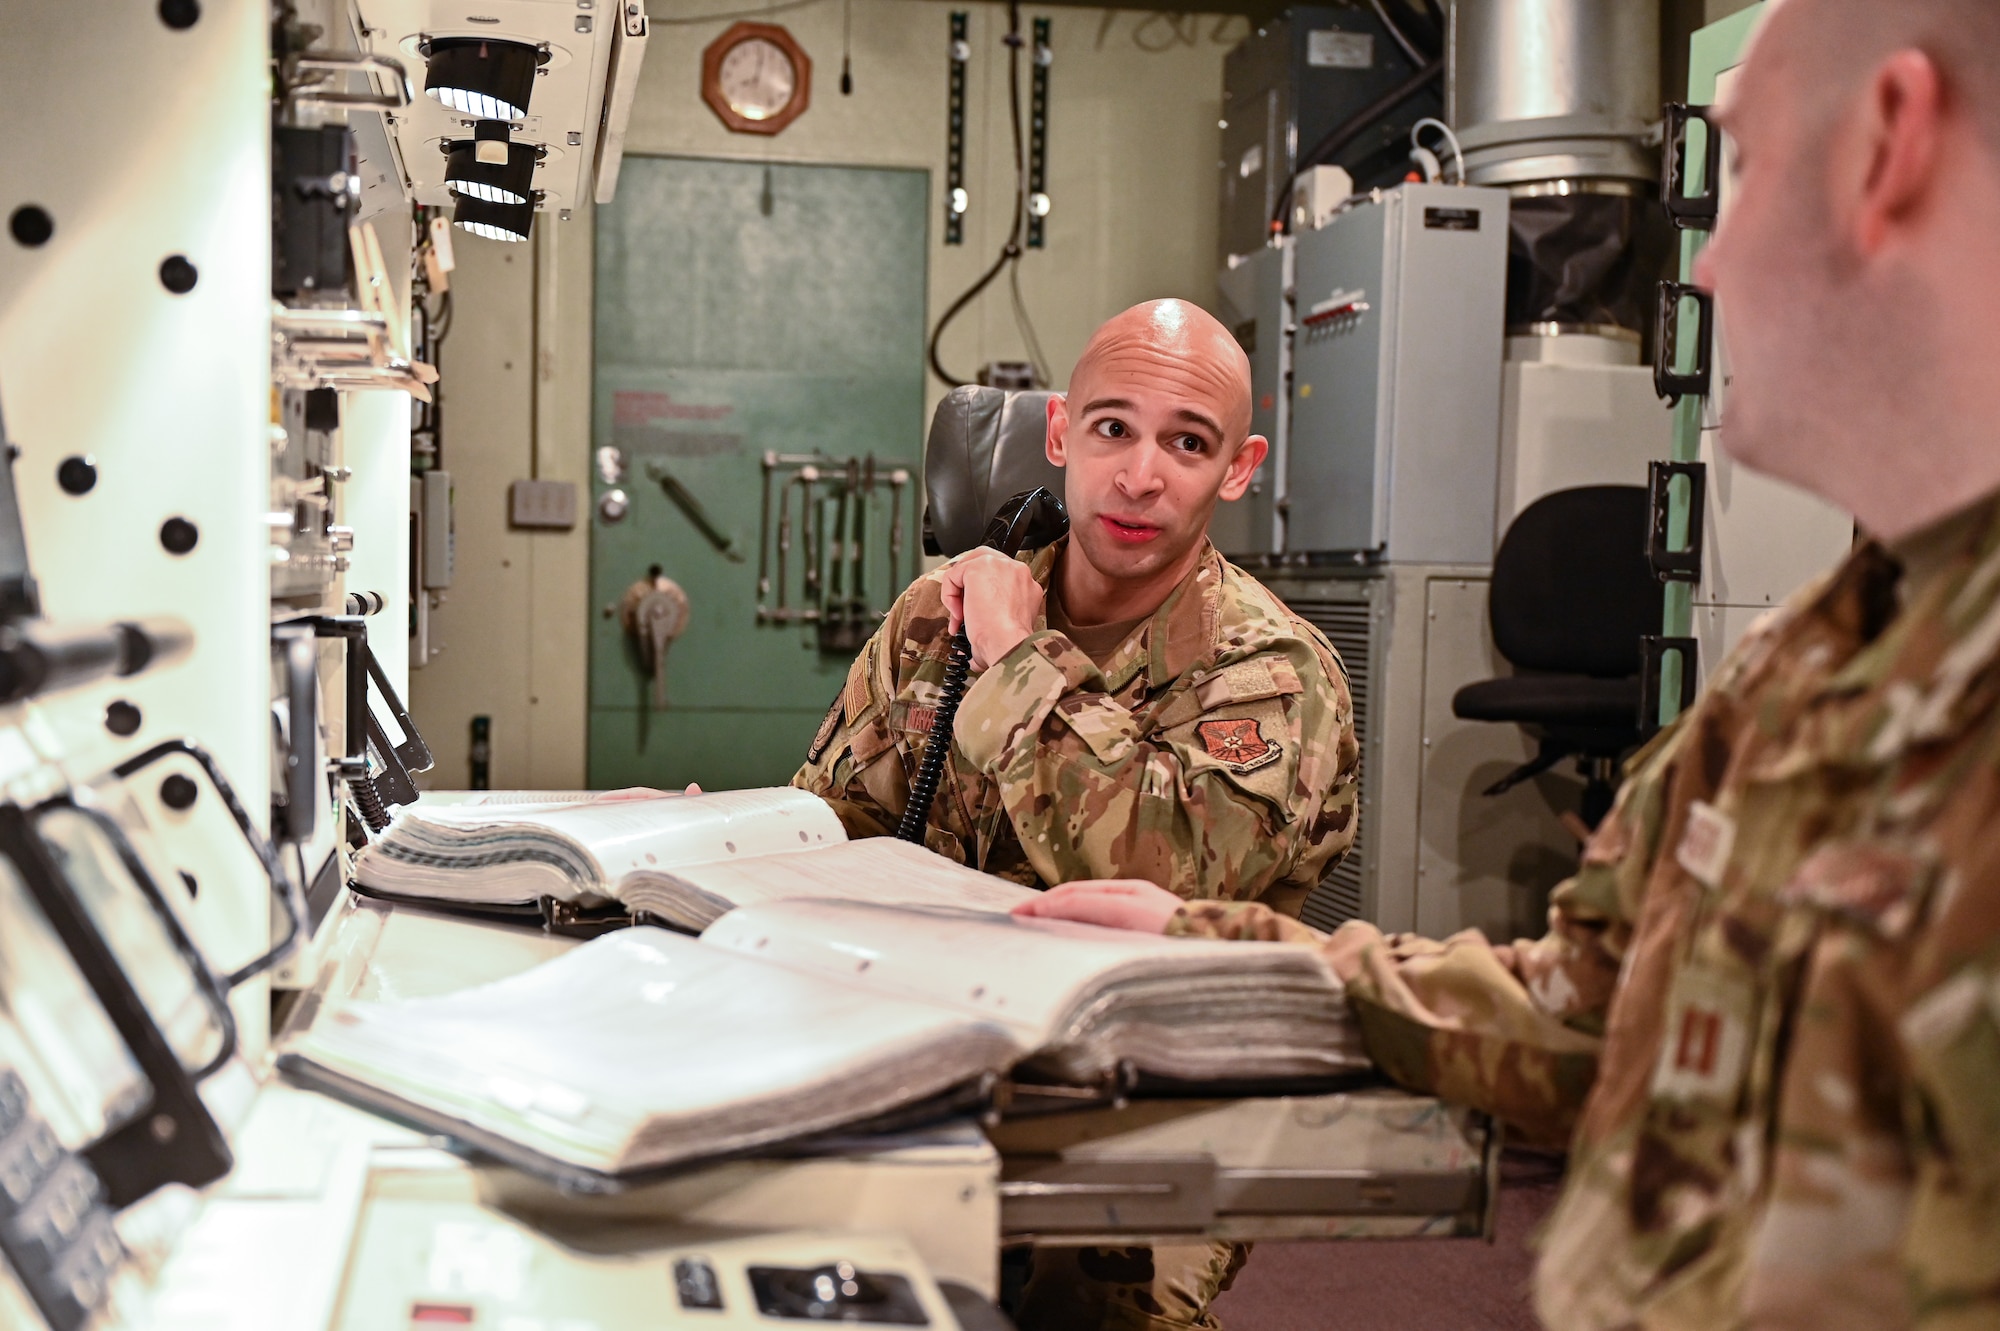 1st Lt. Juan Navarro, 321st Missile Squadron, discusses different actions with Capt. Christian Heath, 321 MS, during training in the Missile Procedures Trainer on F.E. Warren Air Force Base, Wyoming, June 17, 2021. The Air Force Association awarded Heath and Navarro the 2020 Gen. Thomas S. Power Outstanding Missile Crew Award. (U.S. Air Force photo by Joseph Coslett)